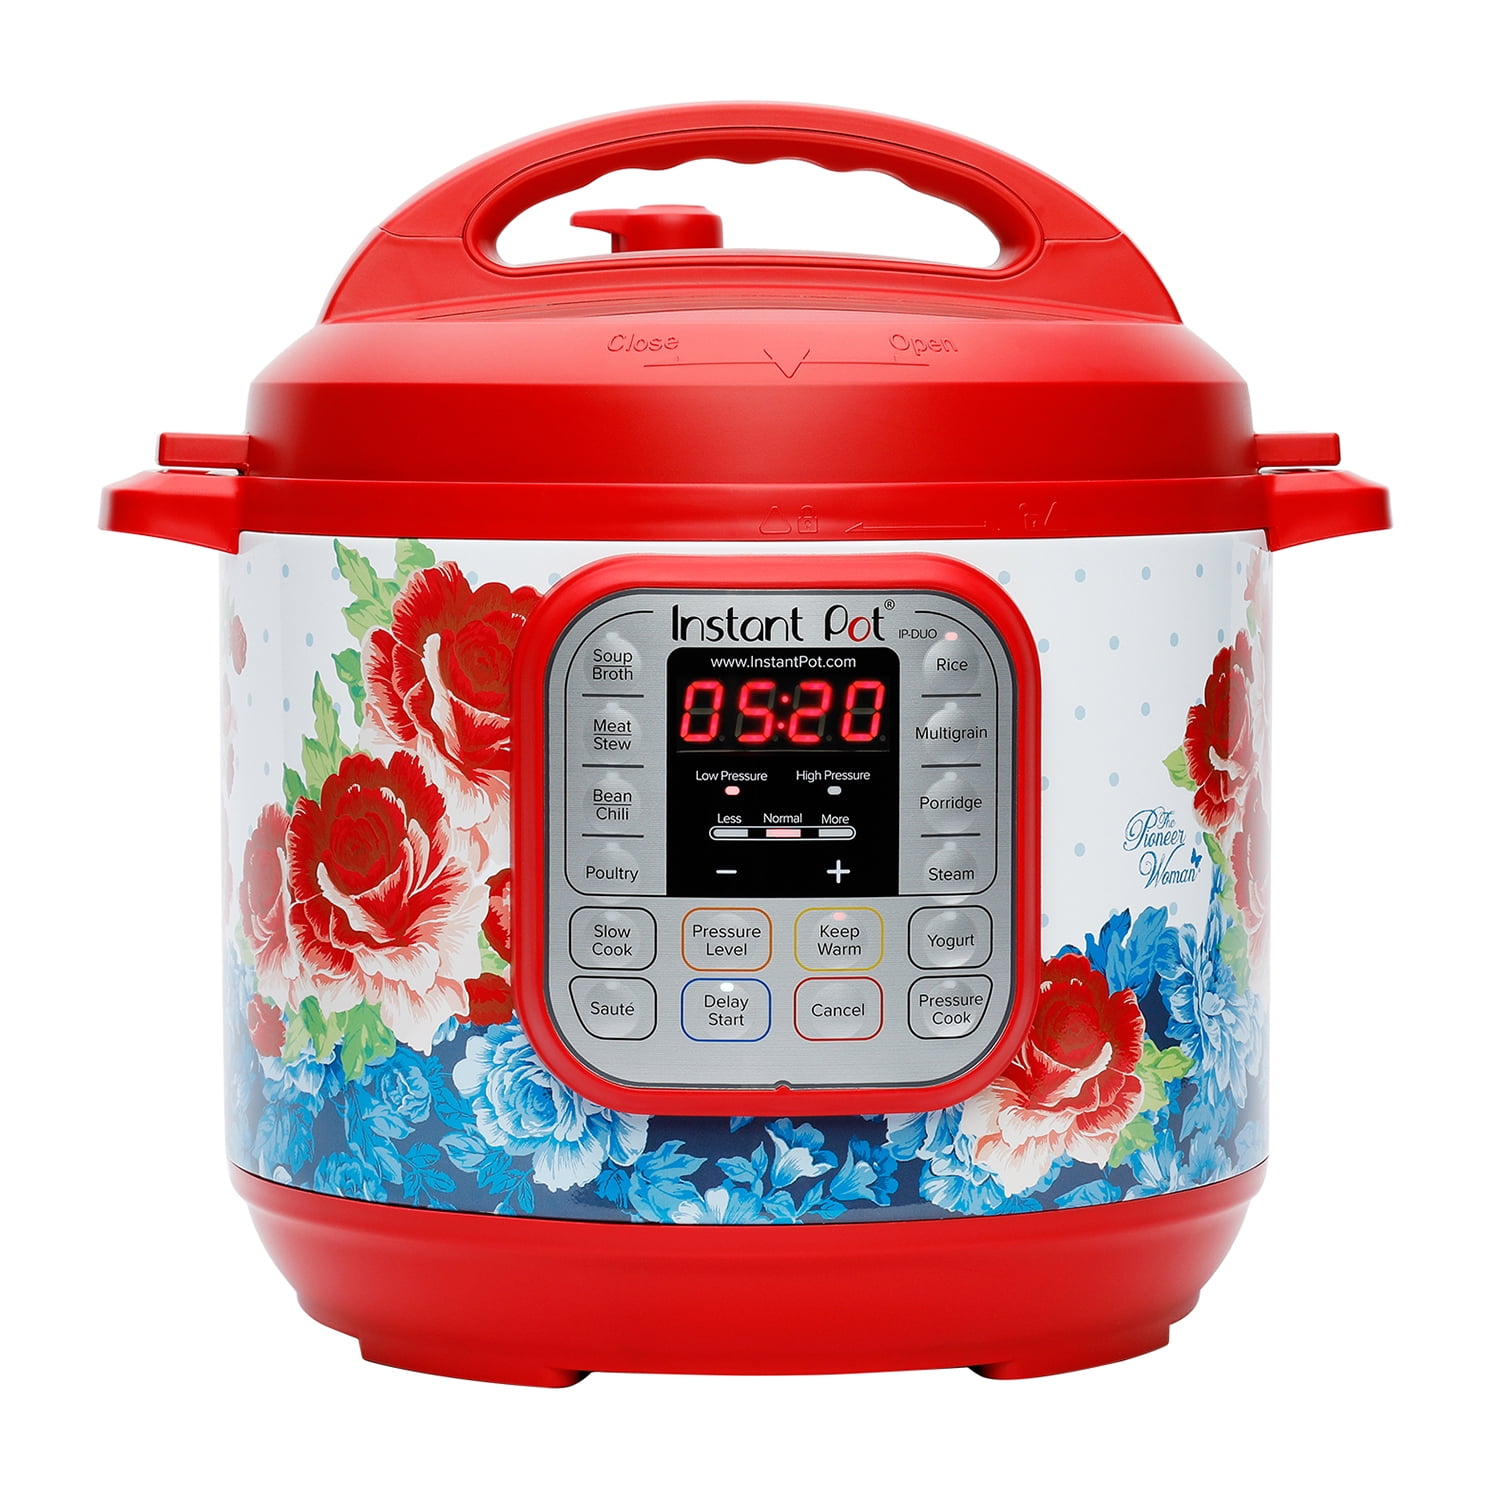 Walmart Launches Pioneer Woman Flowered Instant Pots